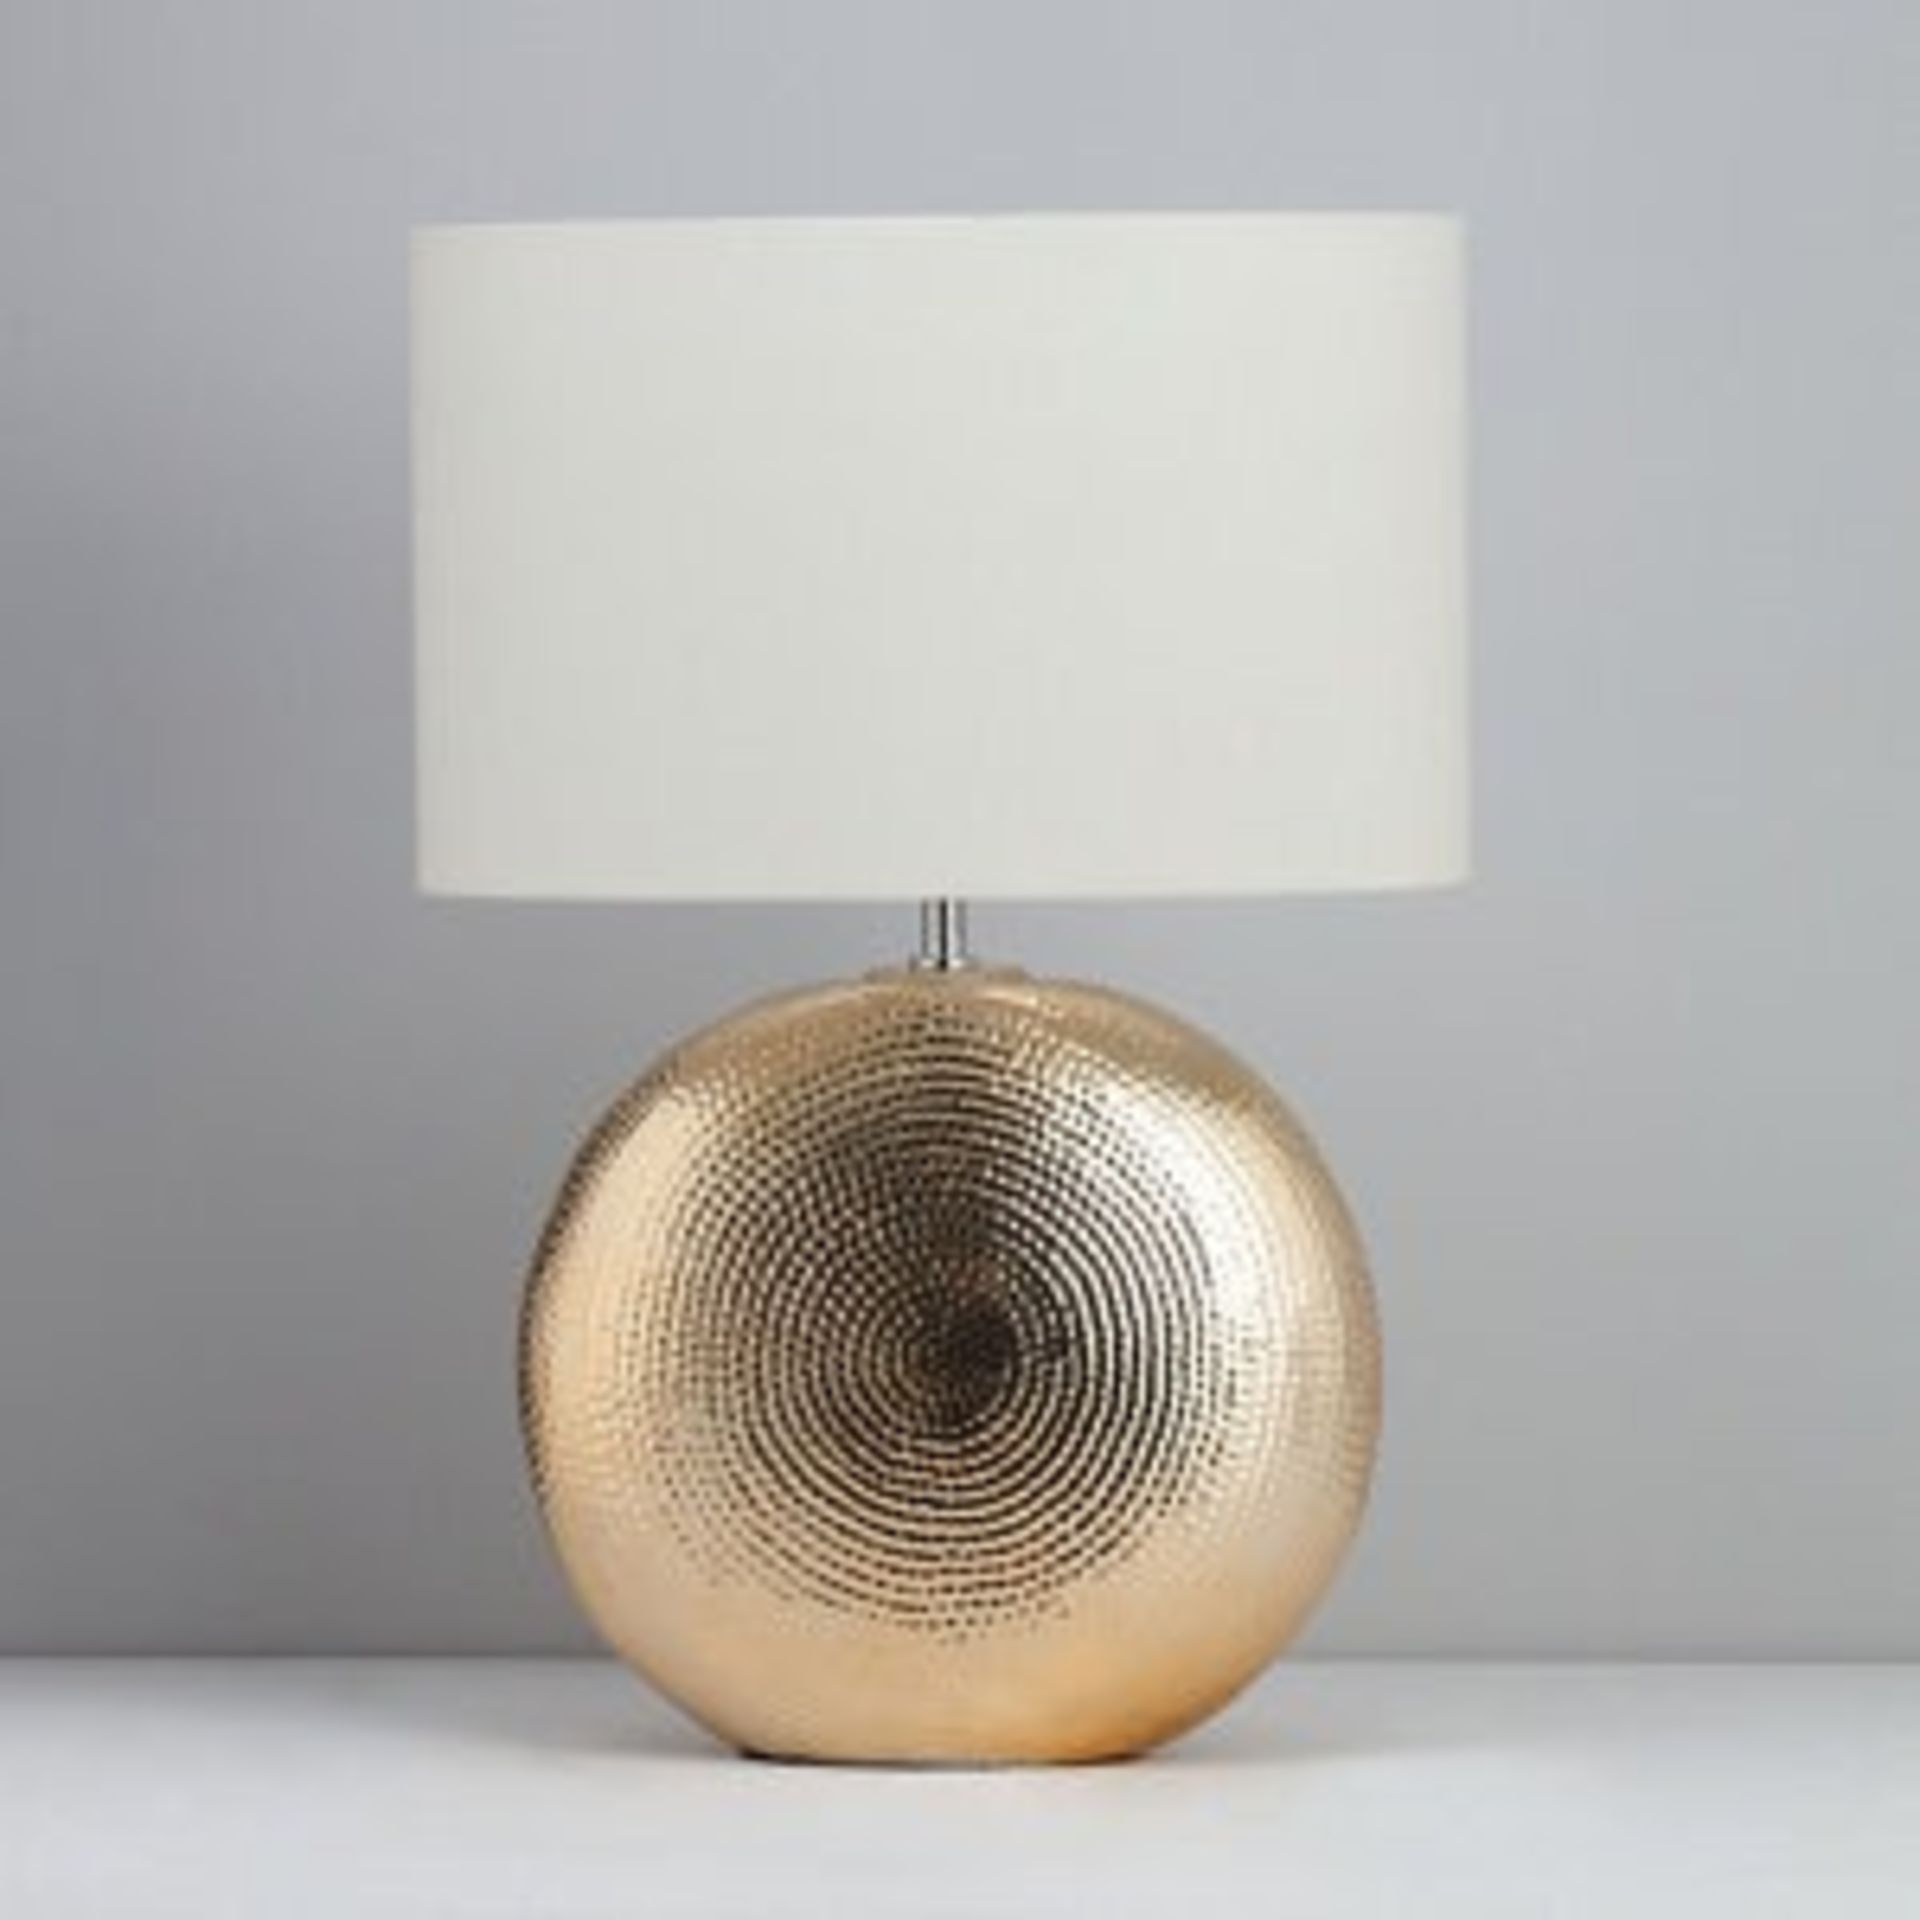 Inlight Locaste Textured Polished Gold Effect Round Table Light - ER47